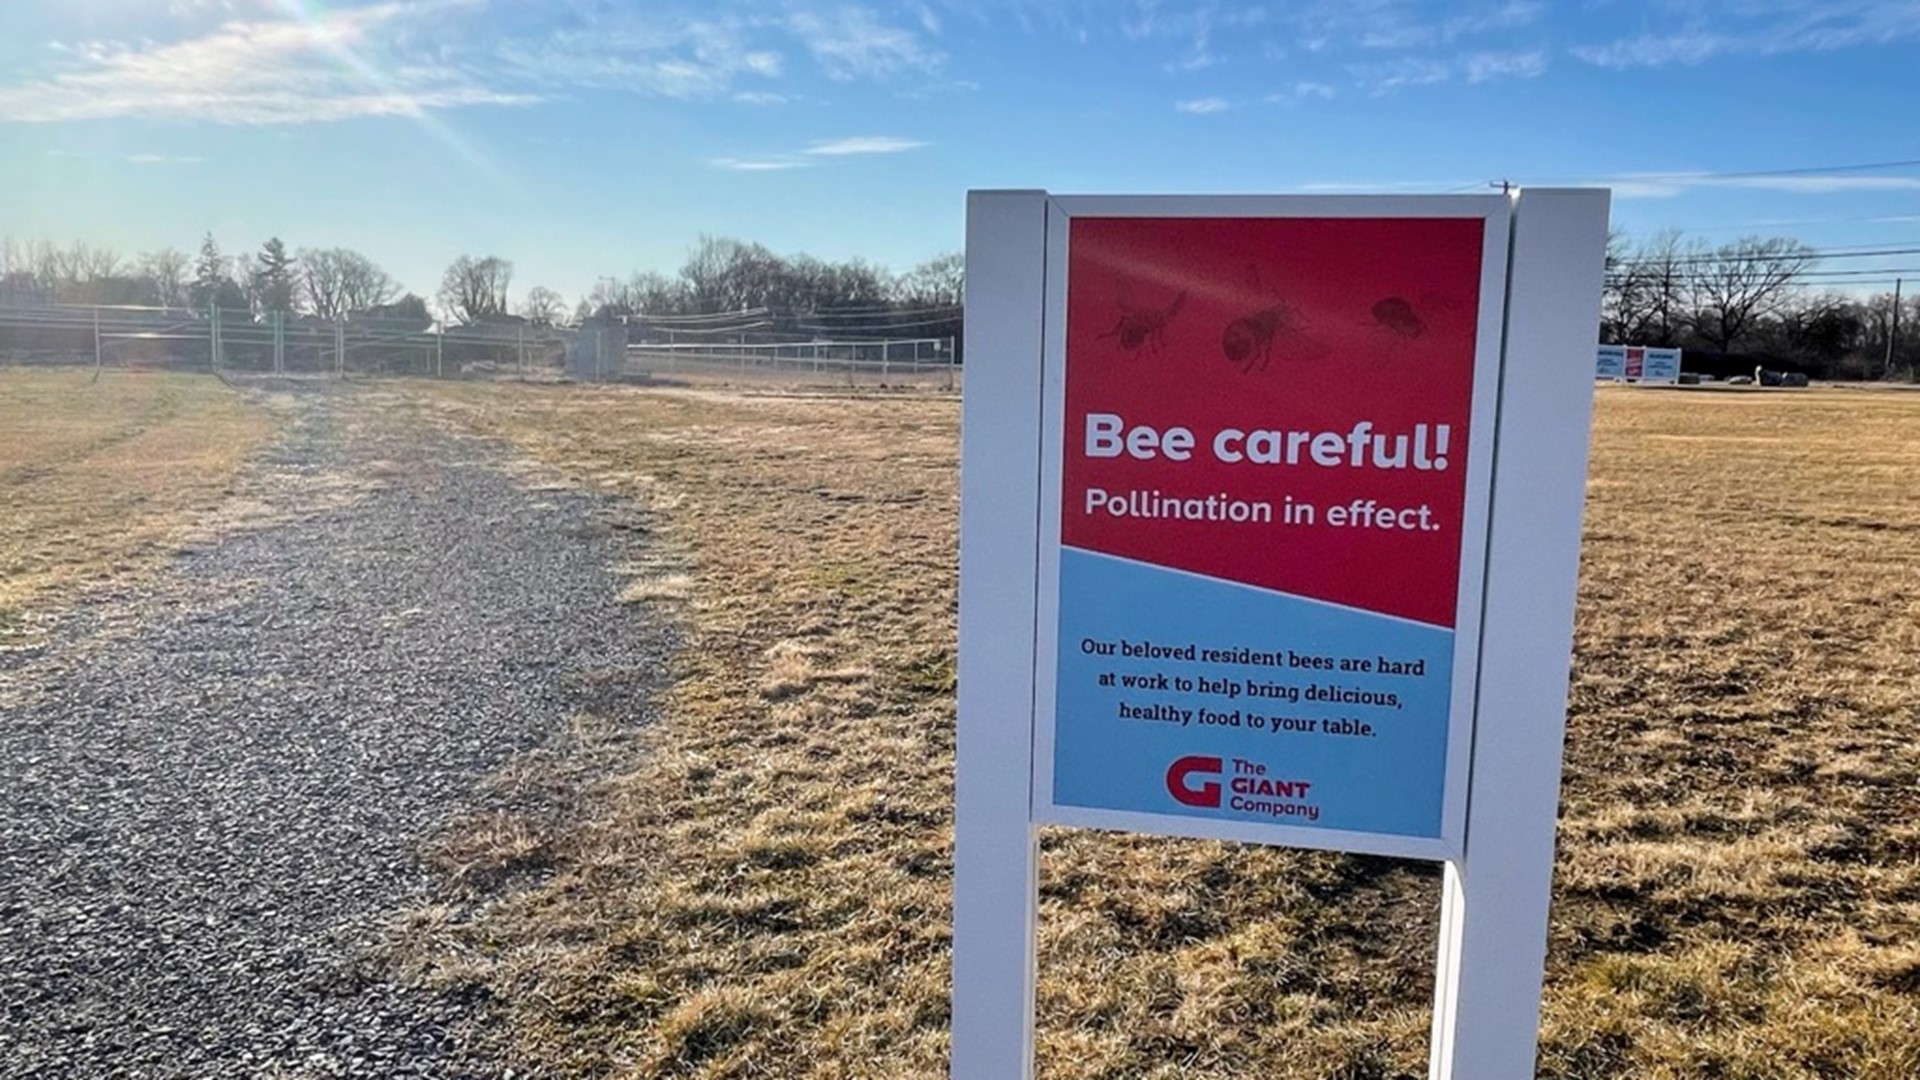 The company said the hives contained approximately 60,000 bees. It is warning Pa. beekeepers to keep an eye on their own hives and bee colonies.